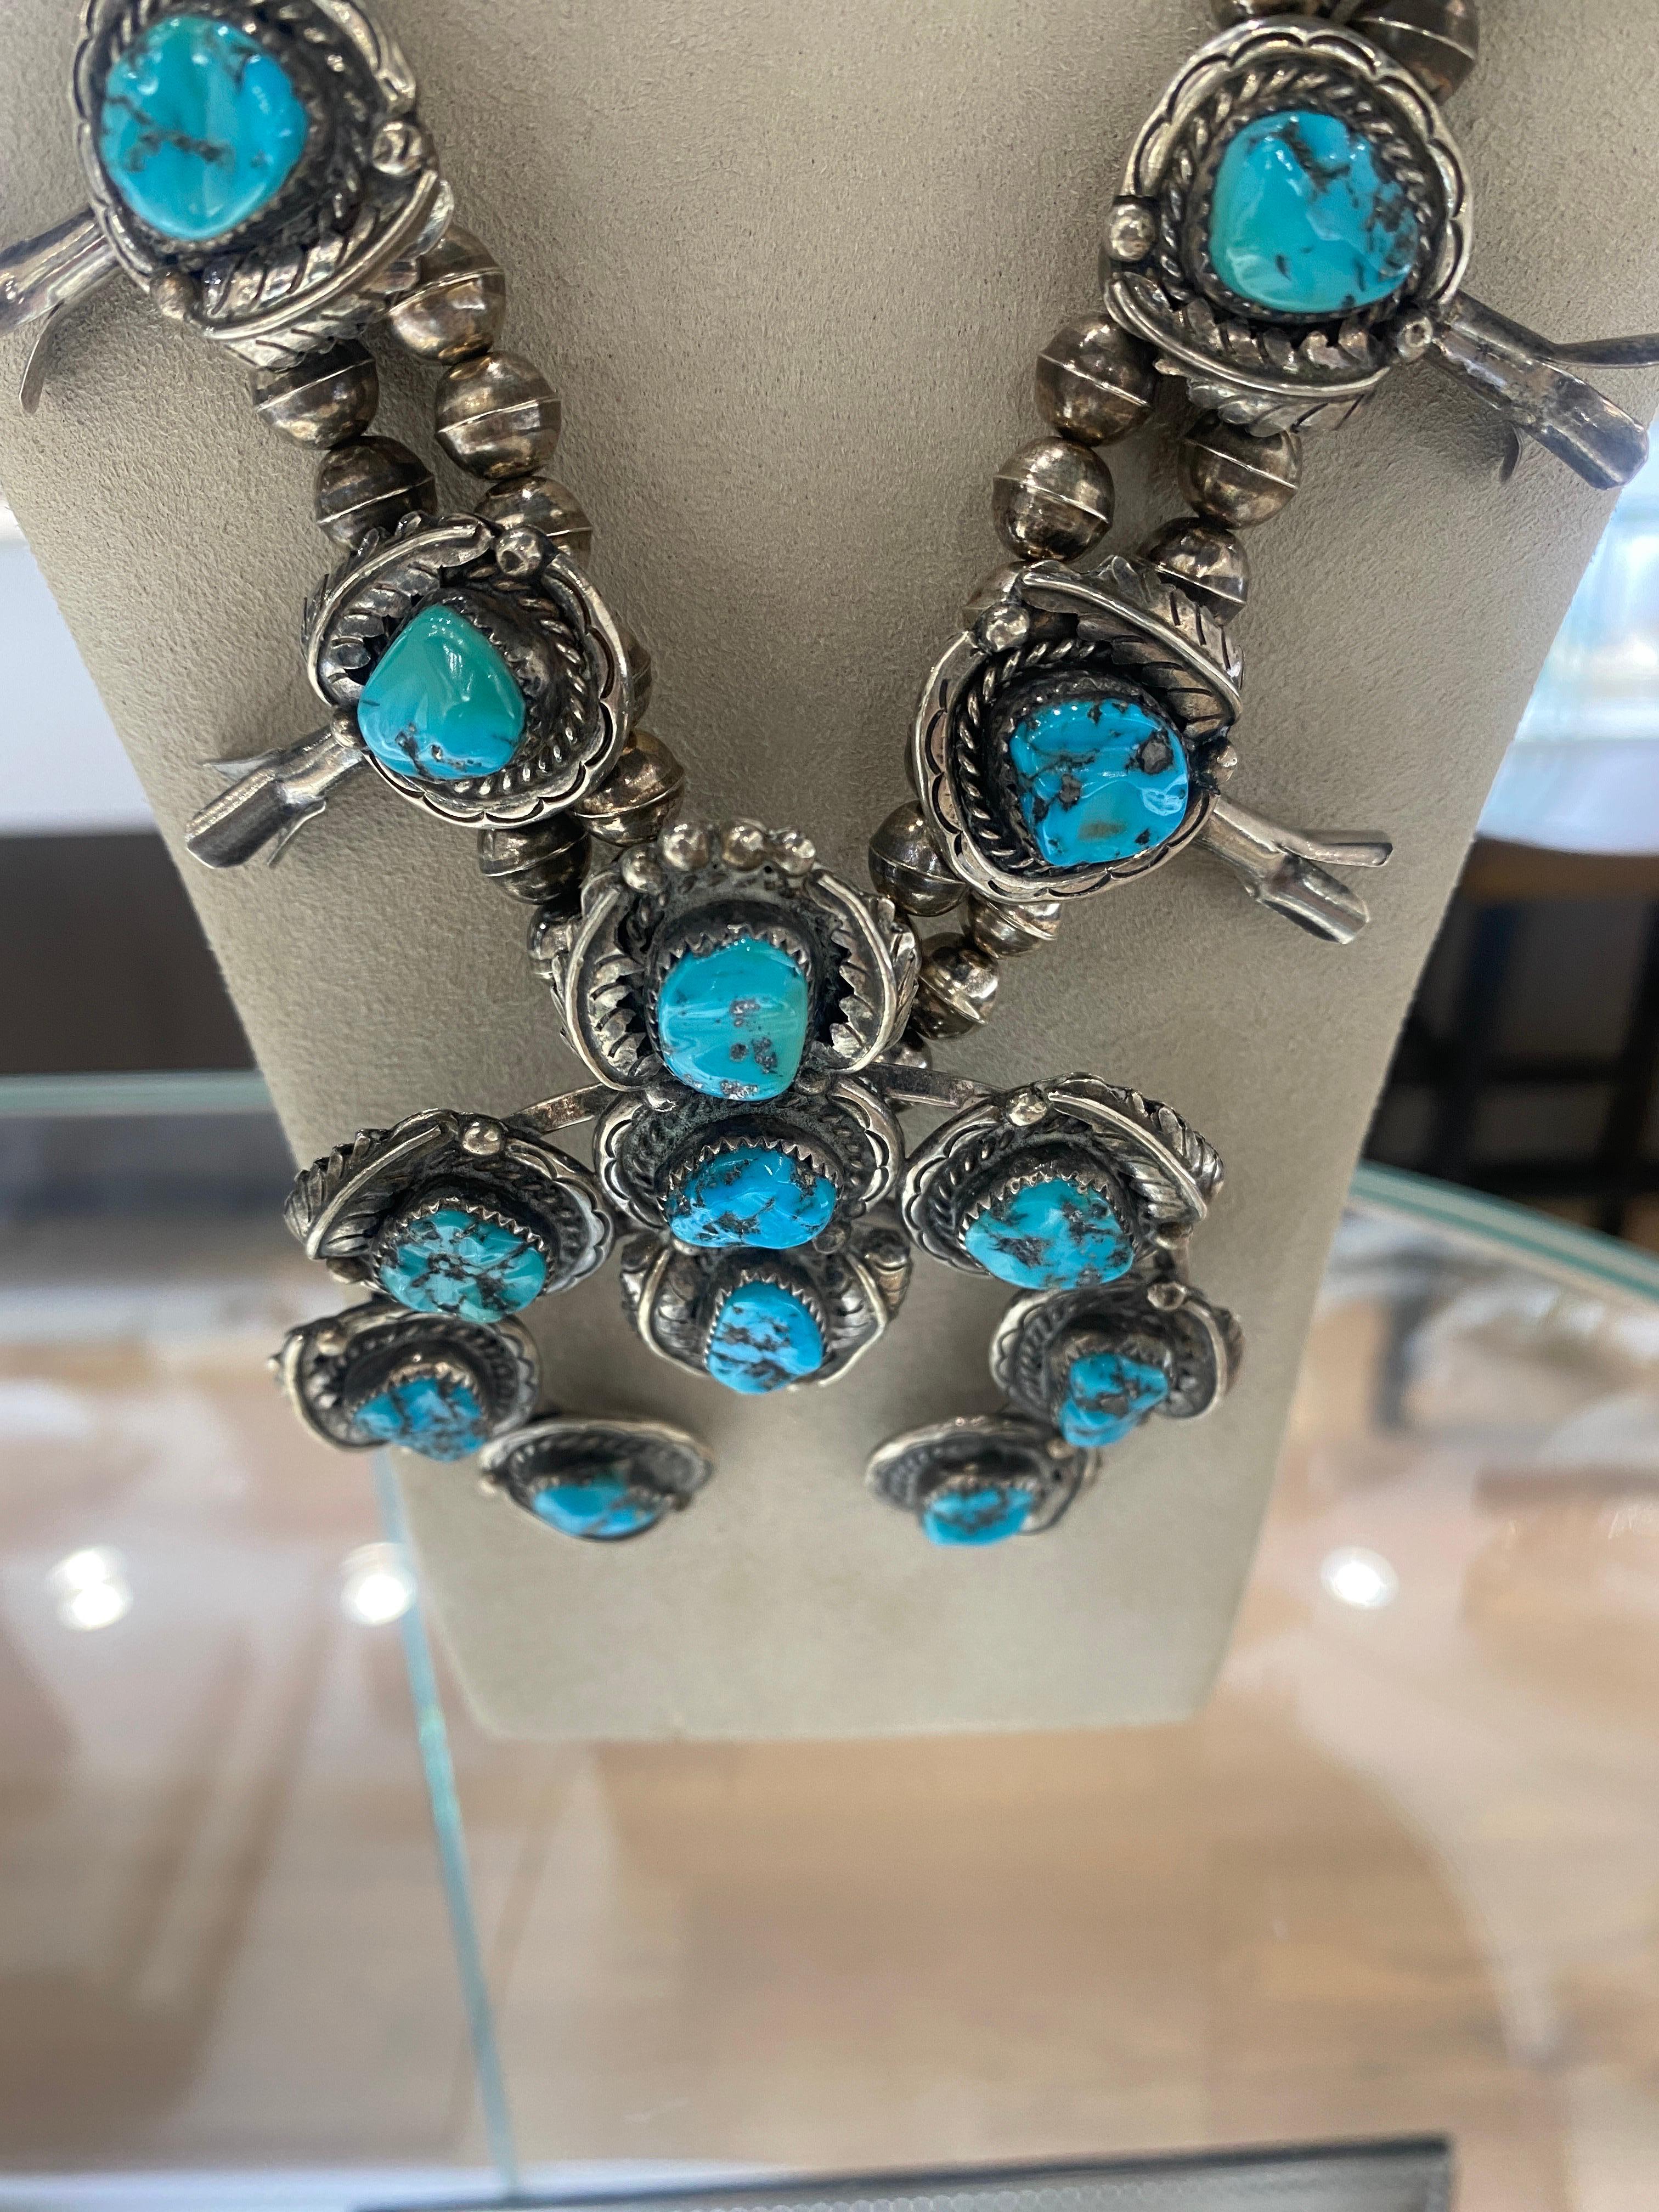 Vintage Turquoise Squash Blossom Necklace In Excellent Condition For Sale In Houston, TX